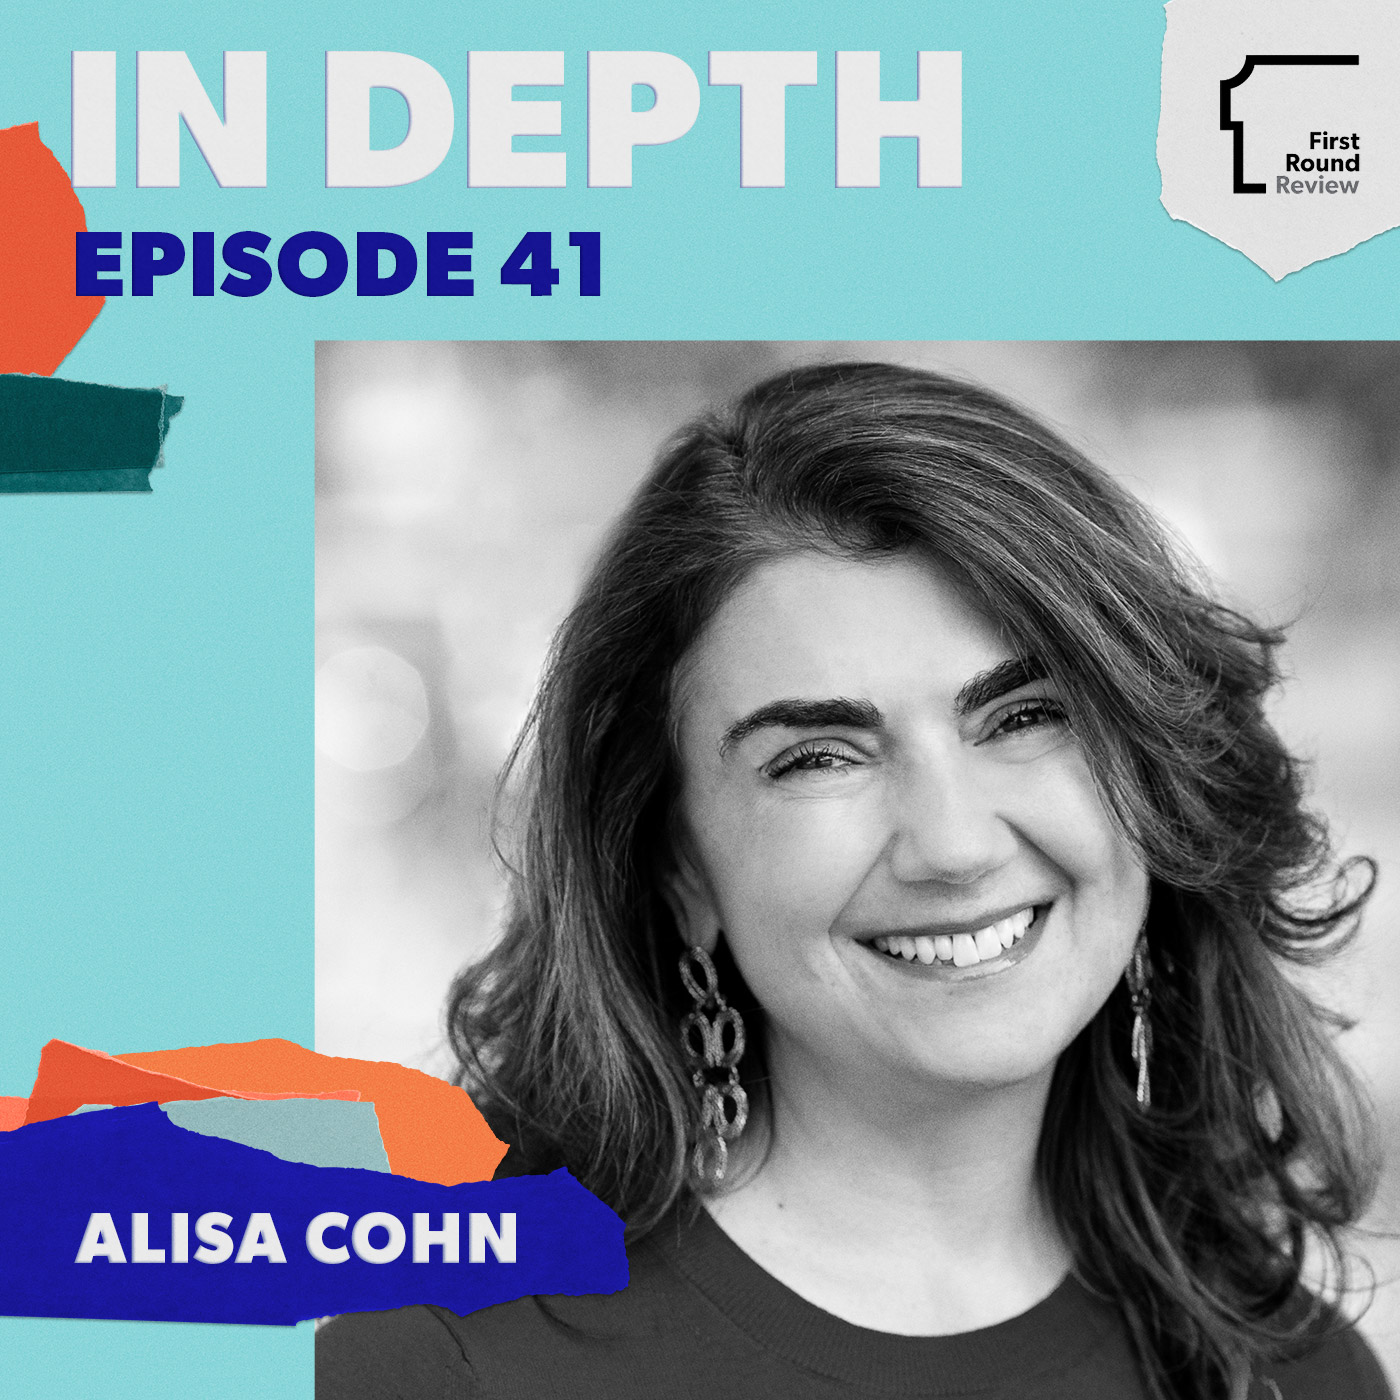 Growing from founder to CEO: Executive coach Alisa Cohn on how to get better feedback